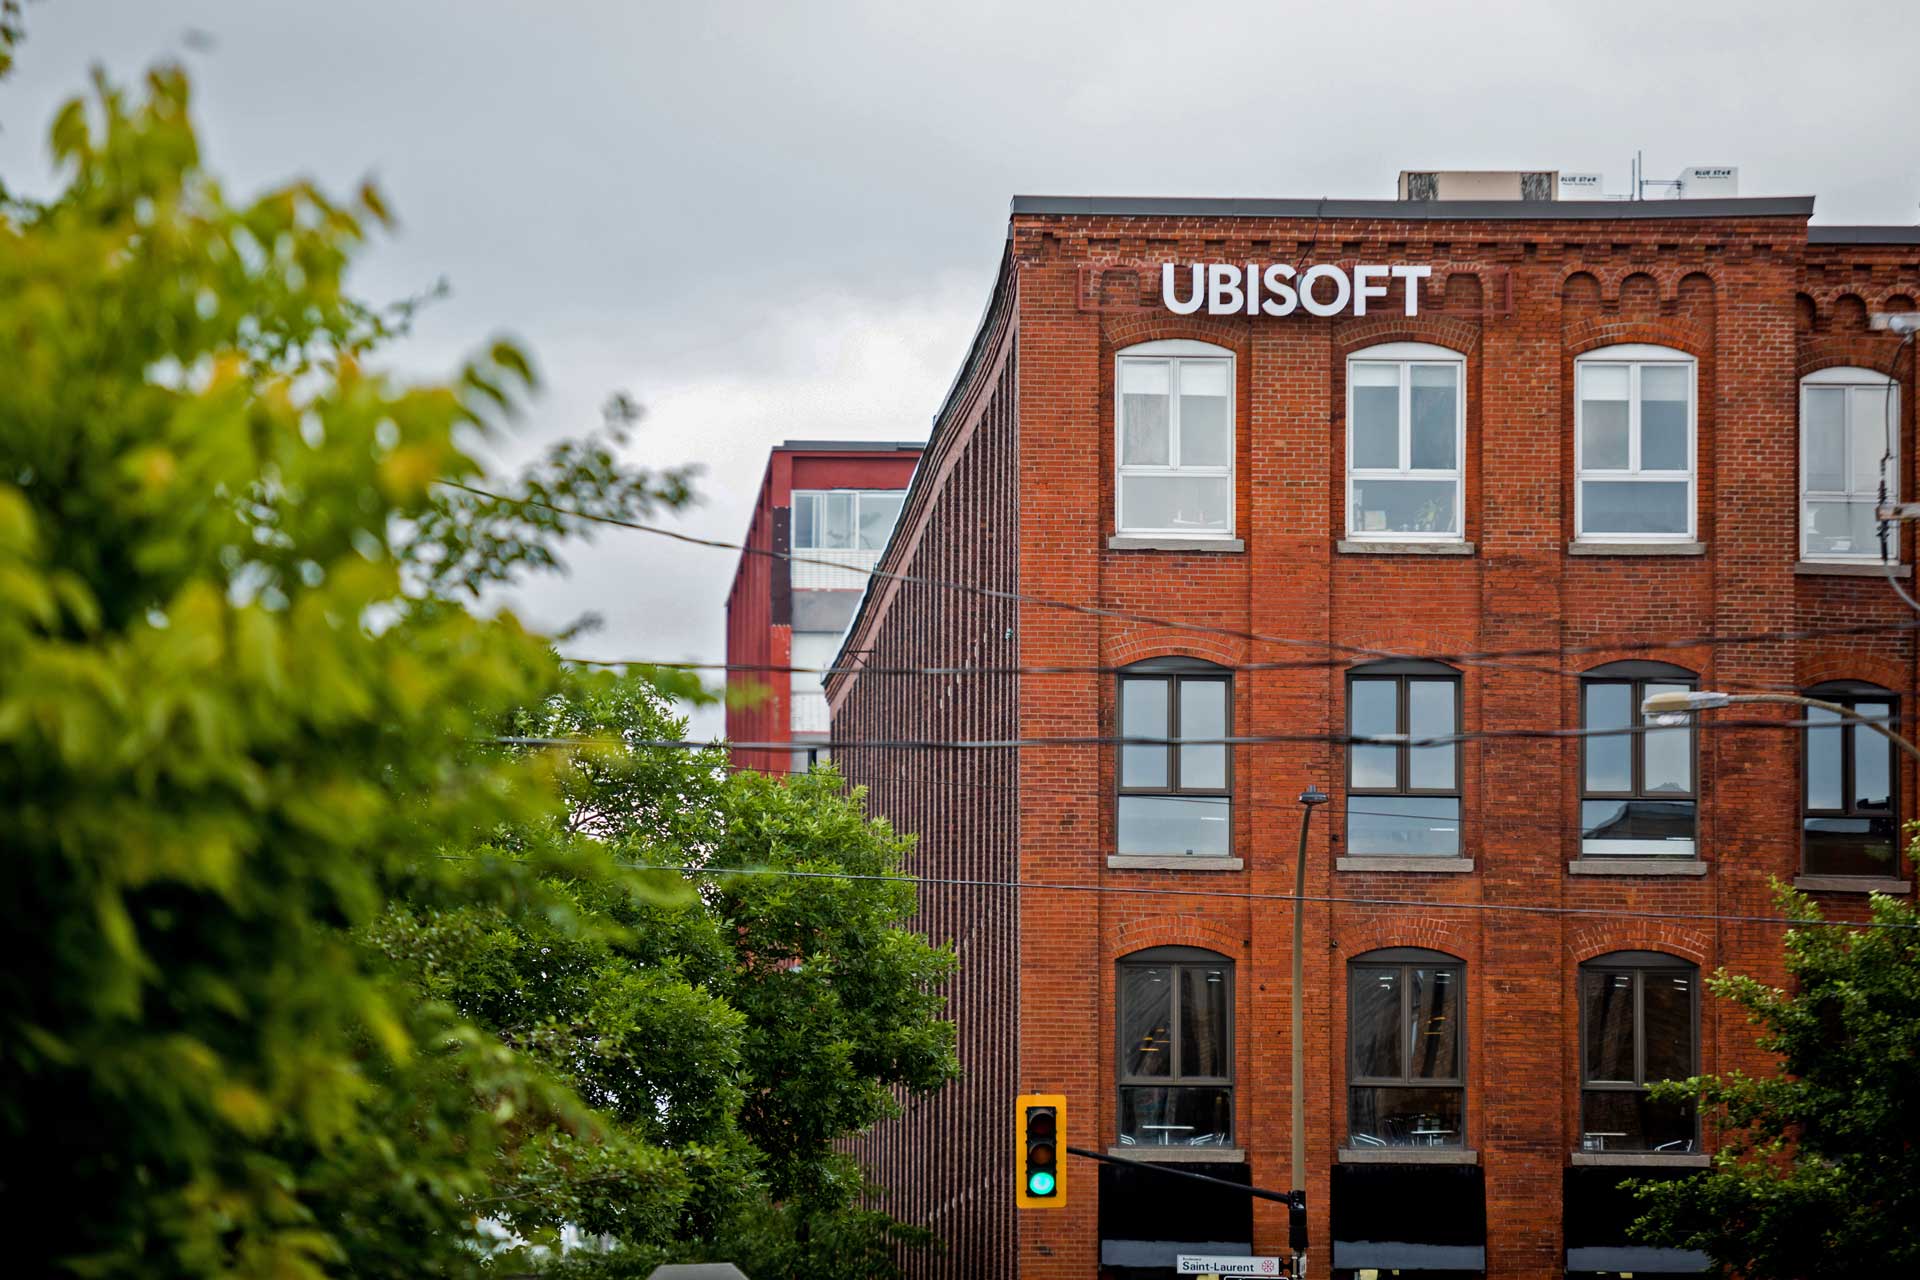  Ubisoft Montréal evacuated following 911 call, but police haven't found a threat 